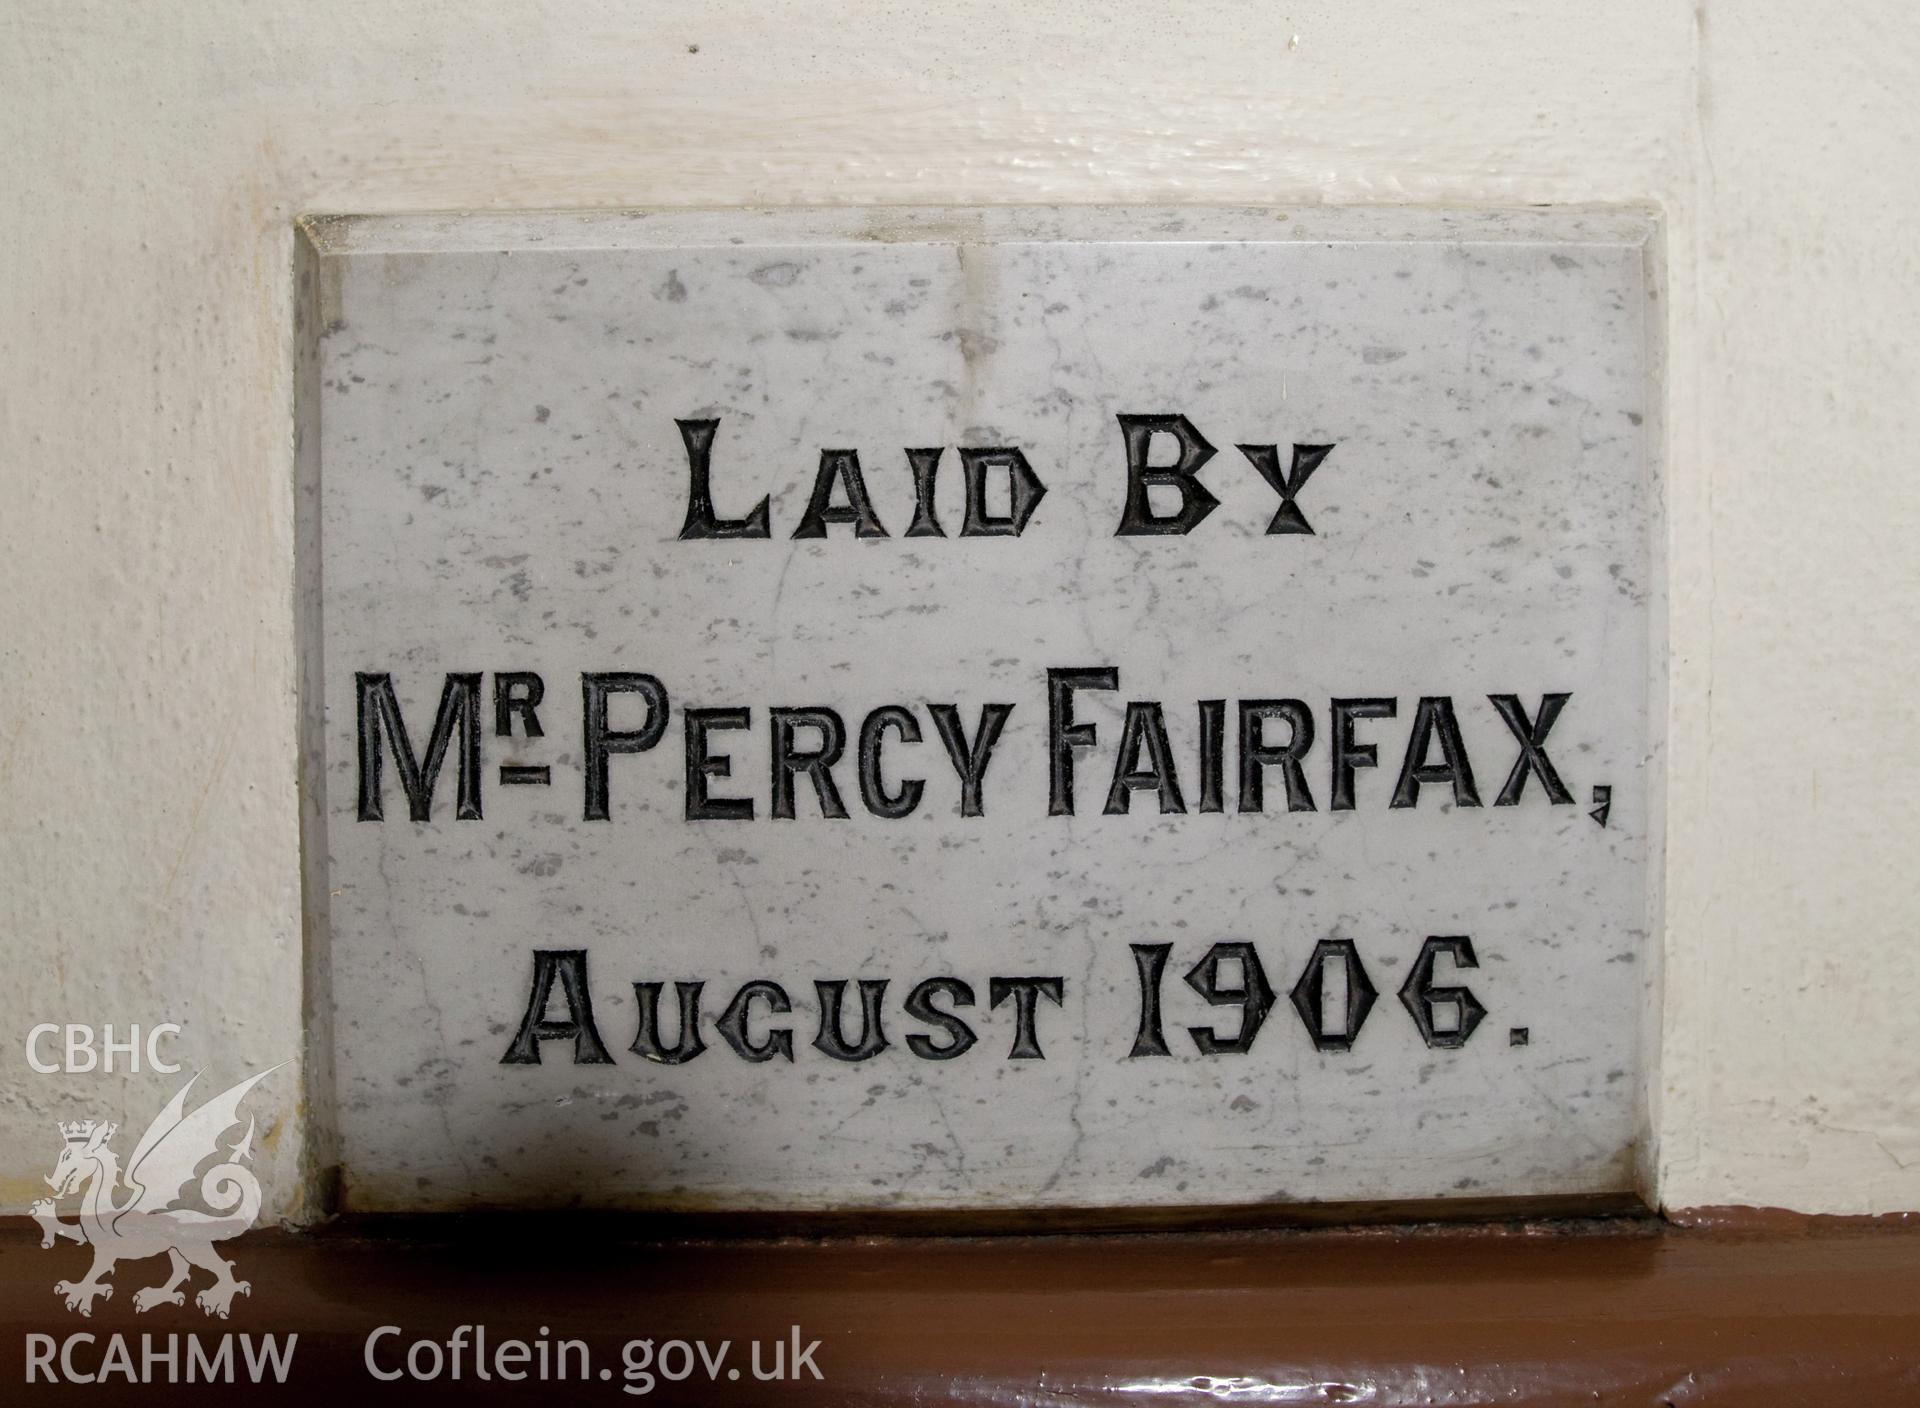 Hanbury Road baptist chapel, Bargoed, digital colour photograph showing completion stone laid by Mr Percy Fairfax, August 1906, received in the course of Emergency Recording case ref no RCS2/1/2247.